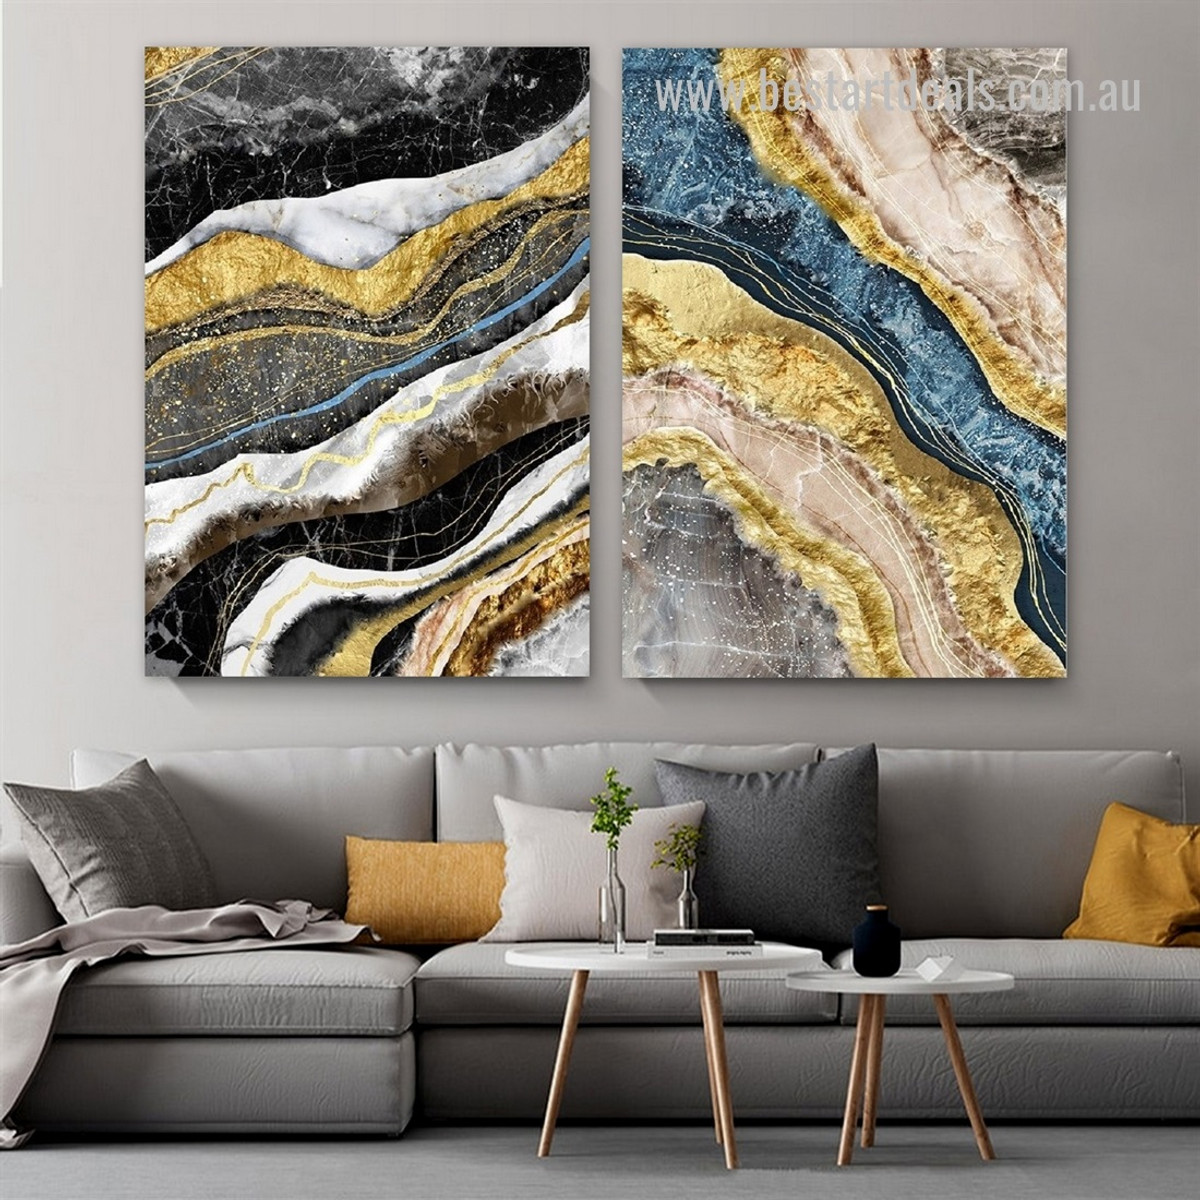 Motley Winding Smudge Abstract Artwork Photograph 2 Piece Modern Framed Stretched Canvas Print for Room Wall Finery